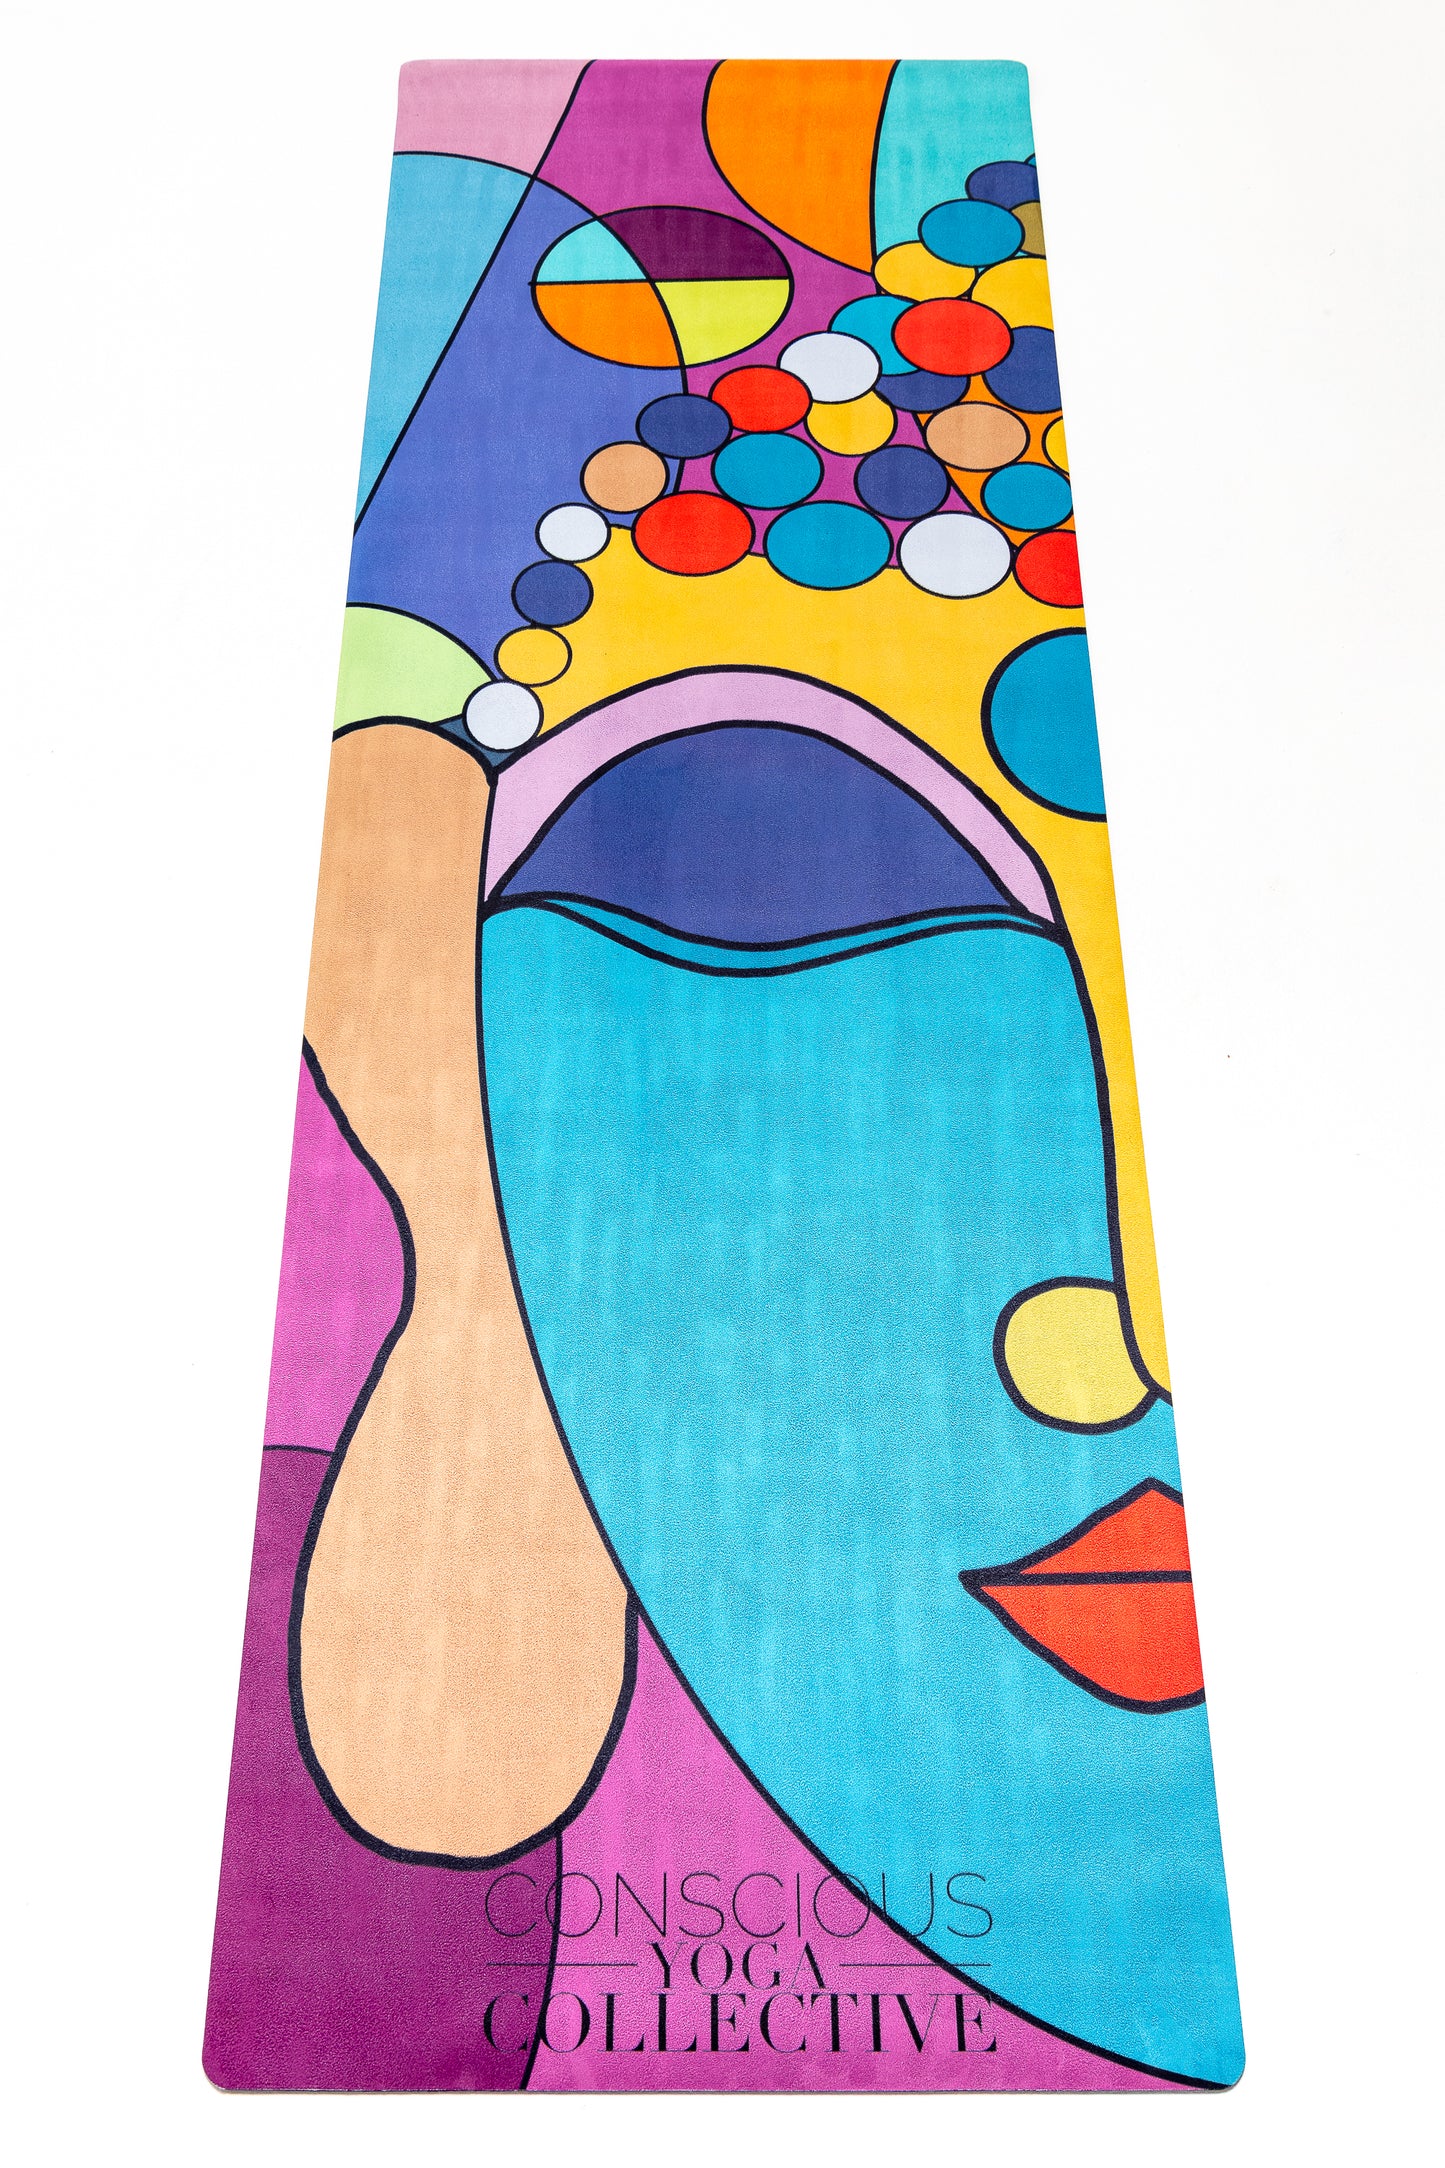 conscious yoga collective yoga mat with  pablo picasso inspired buddha head in pink blue purple yellow orange abstract art